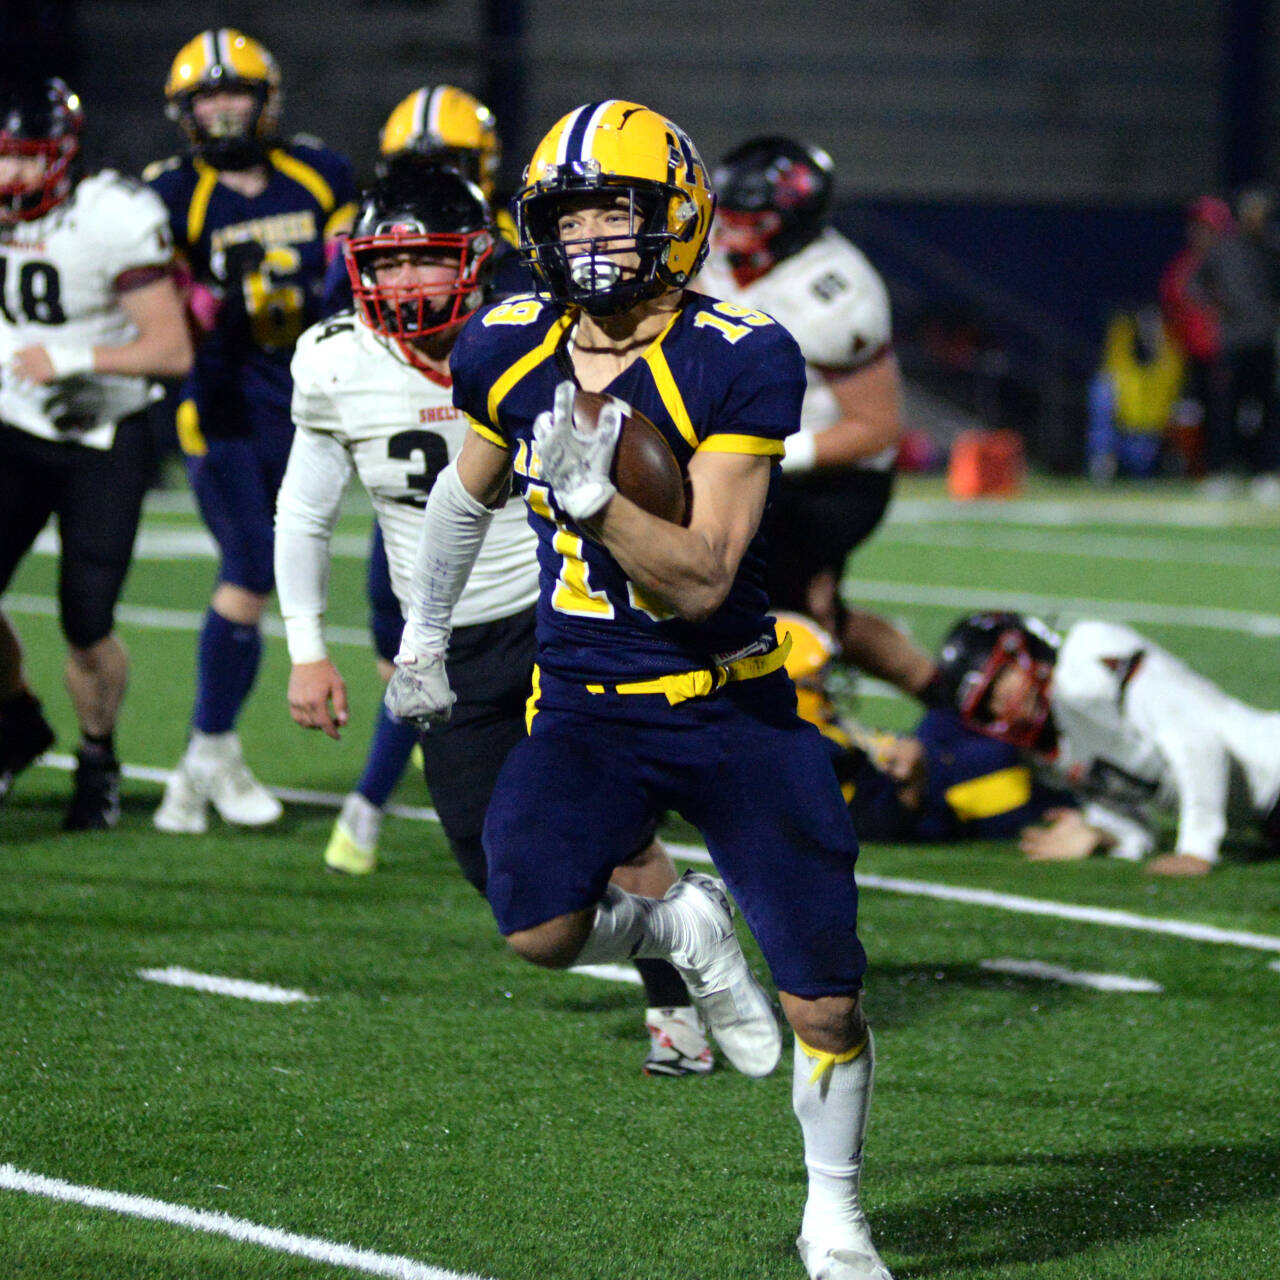 RYAN SPARKS | THE DAILY WORLD Aberdeen running back Aidan Watkins breaks a long run during a 26-19 victory over Shelton on Friday at Stewart Field in Aberdeen.